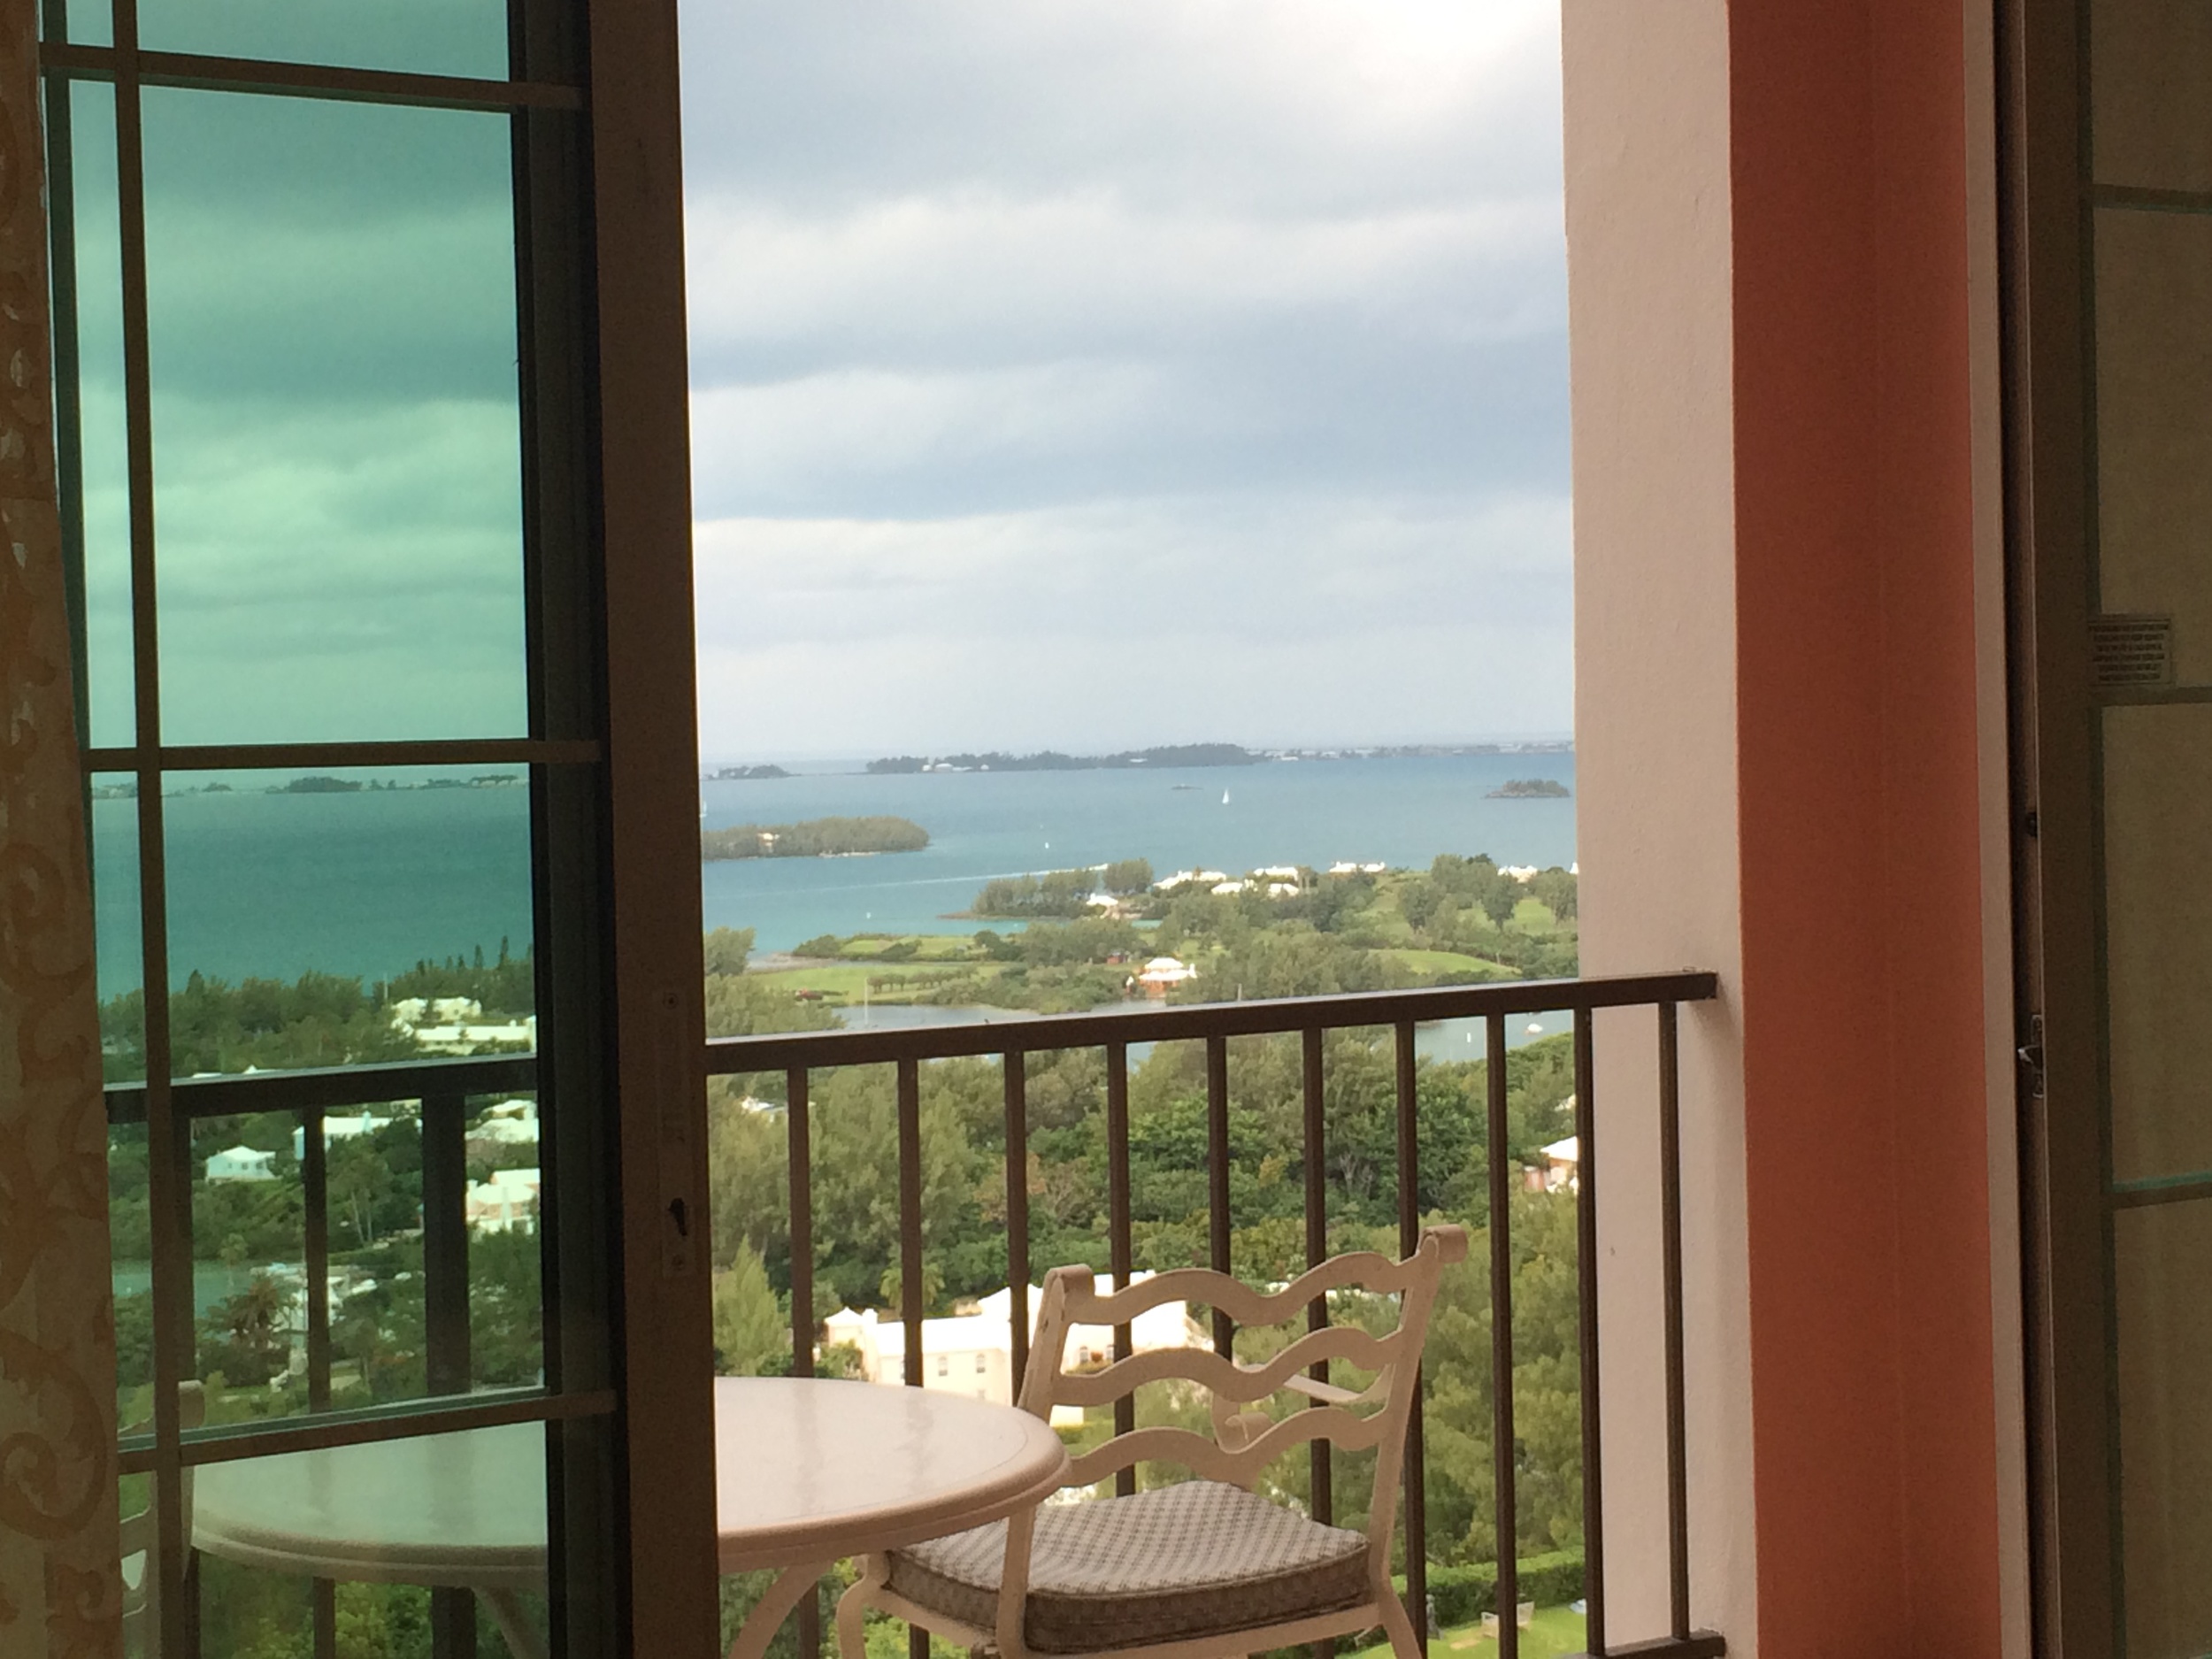 View from the Room, Bermuda